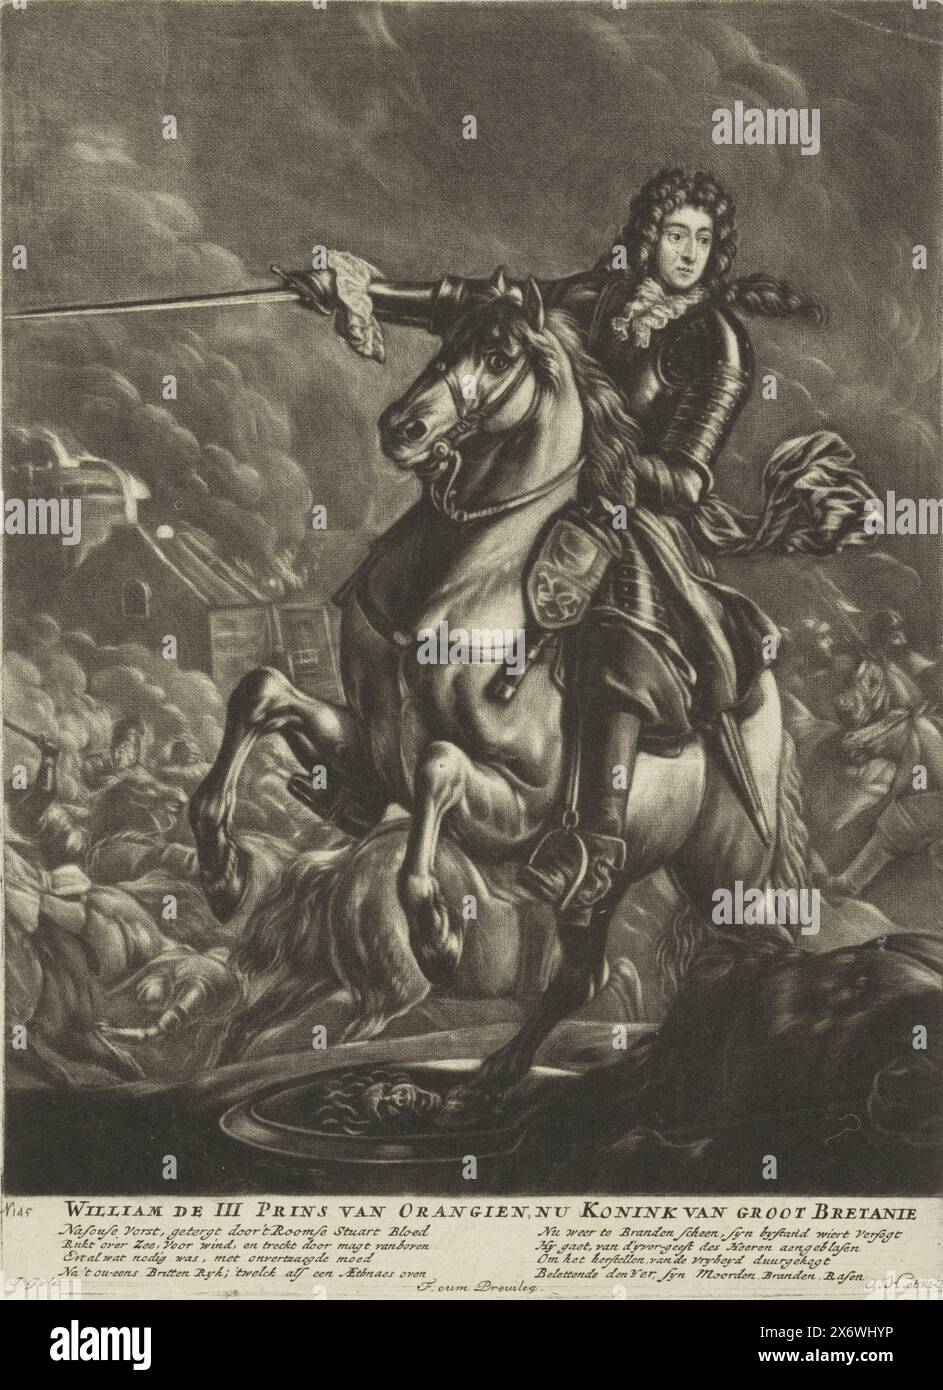 Equestrian portrait of William III, Prince of Orange, Equestrian portrait of William III. A sword in his right hand. A battle in the background. In the bottom margin are his name, titles and two columns with four lines of Dutch text each., print, print maker: Jacob Gole, (mentioned on object), Staten van Holland en West-Friesland, (mentioned on object), Amsterdam, 1688 - 1724, paper, height, 255 mm × width, 188 mm Stock Photo